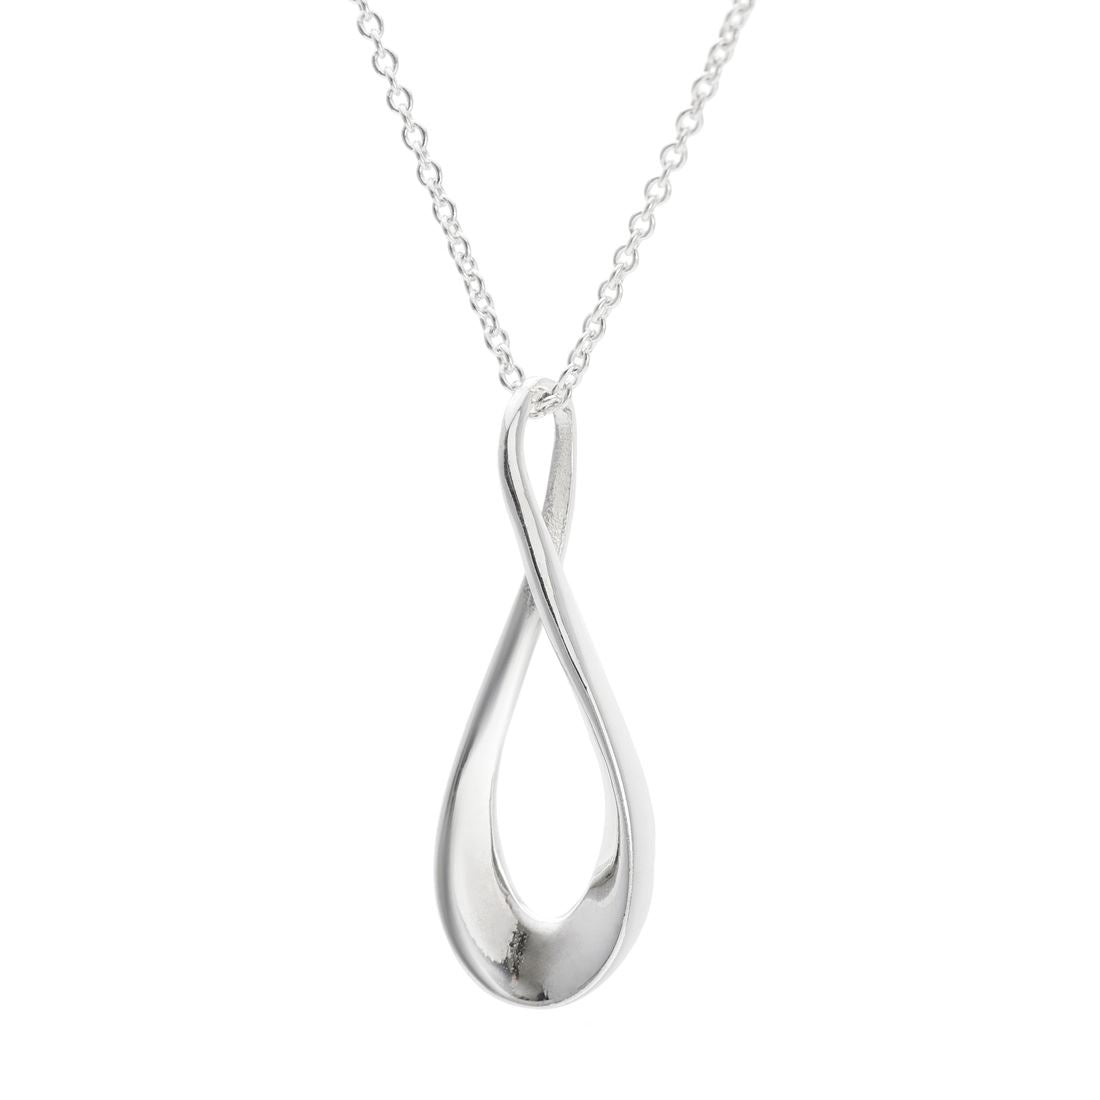 Sterling Silver Infinity Twist Pendant Pendant Necklace - Silverly